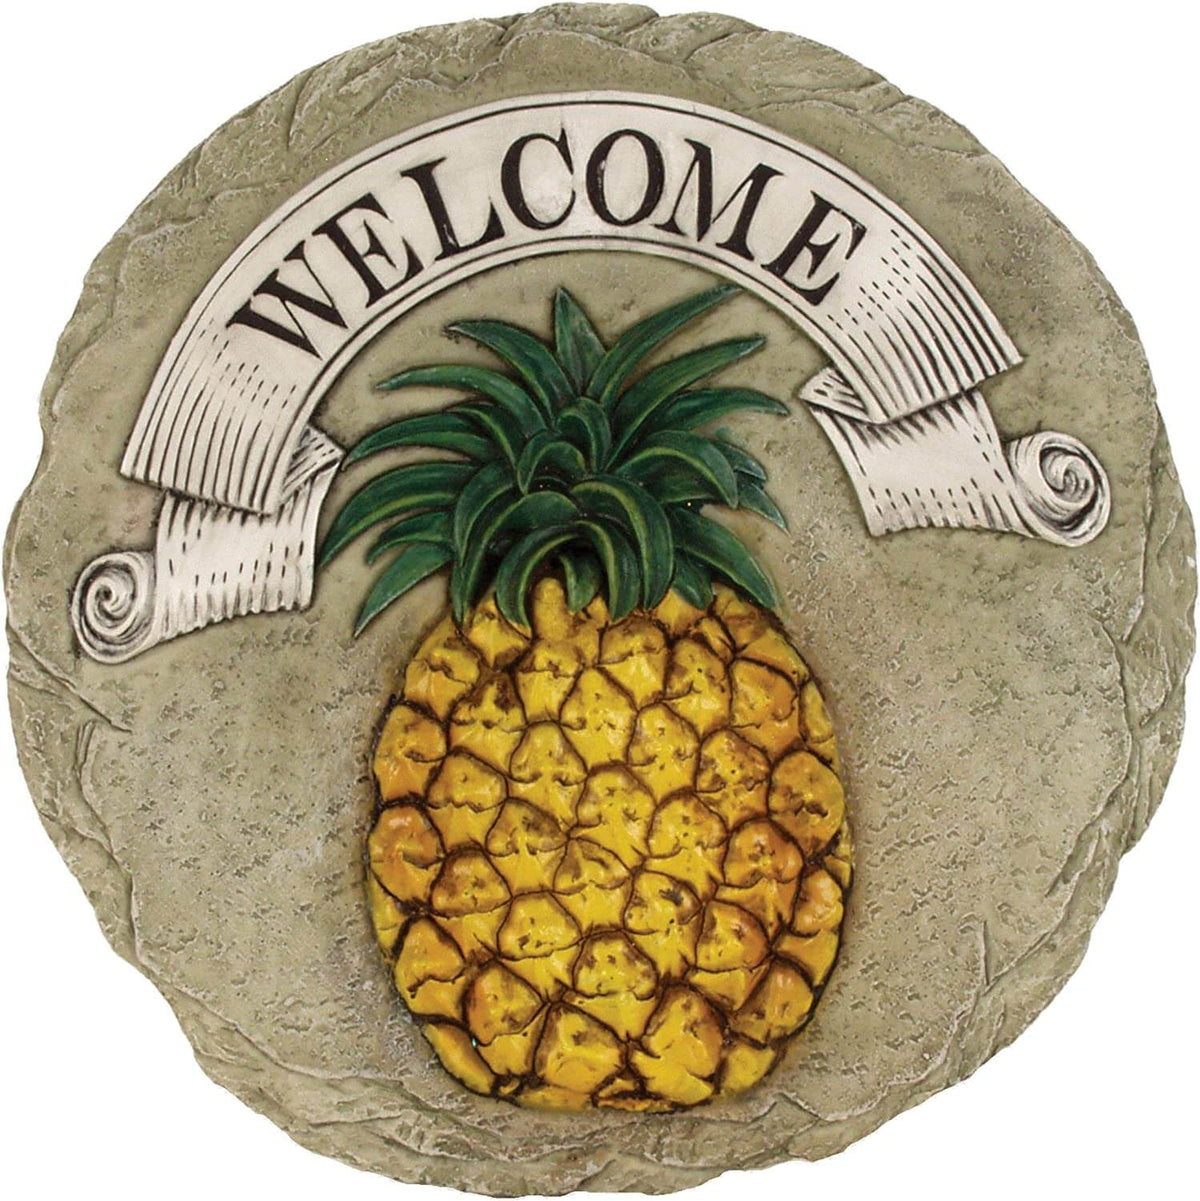 Pineapple Welcome Stepping Stone